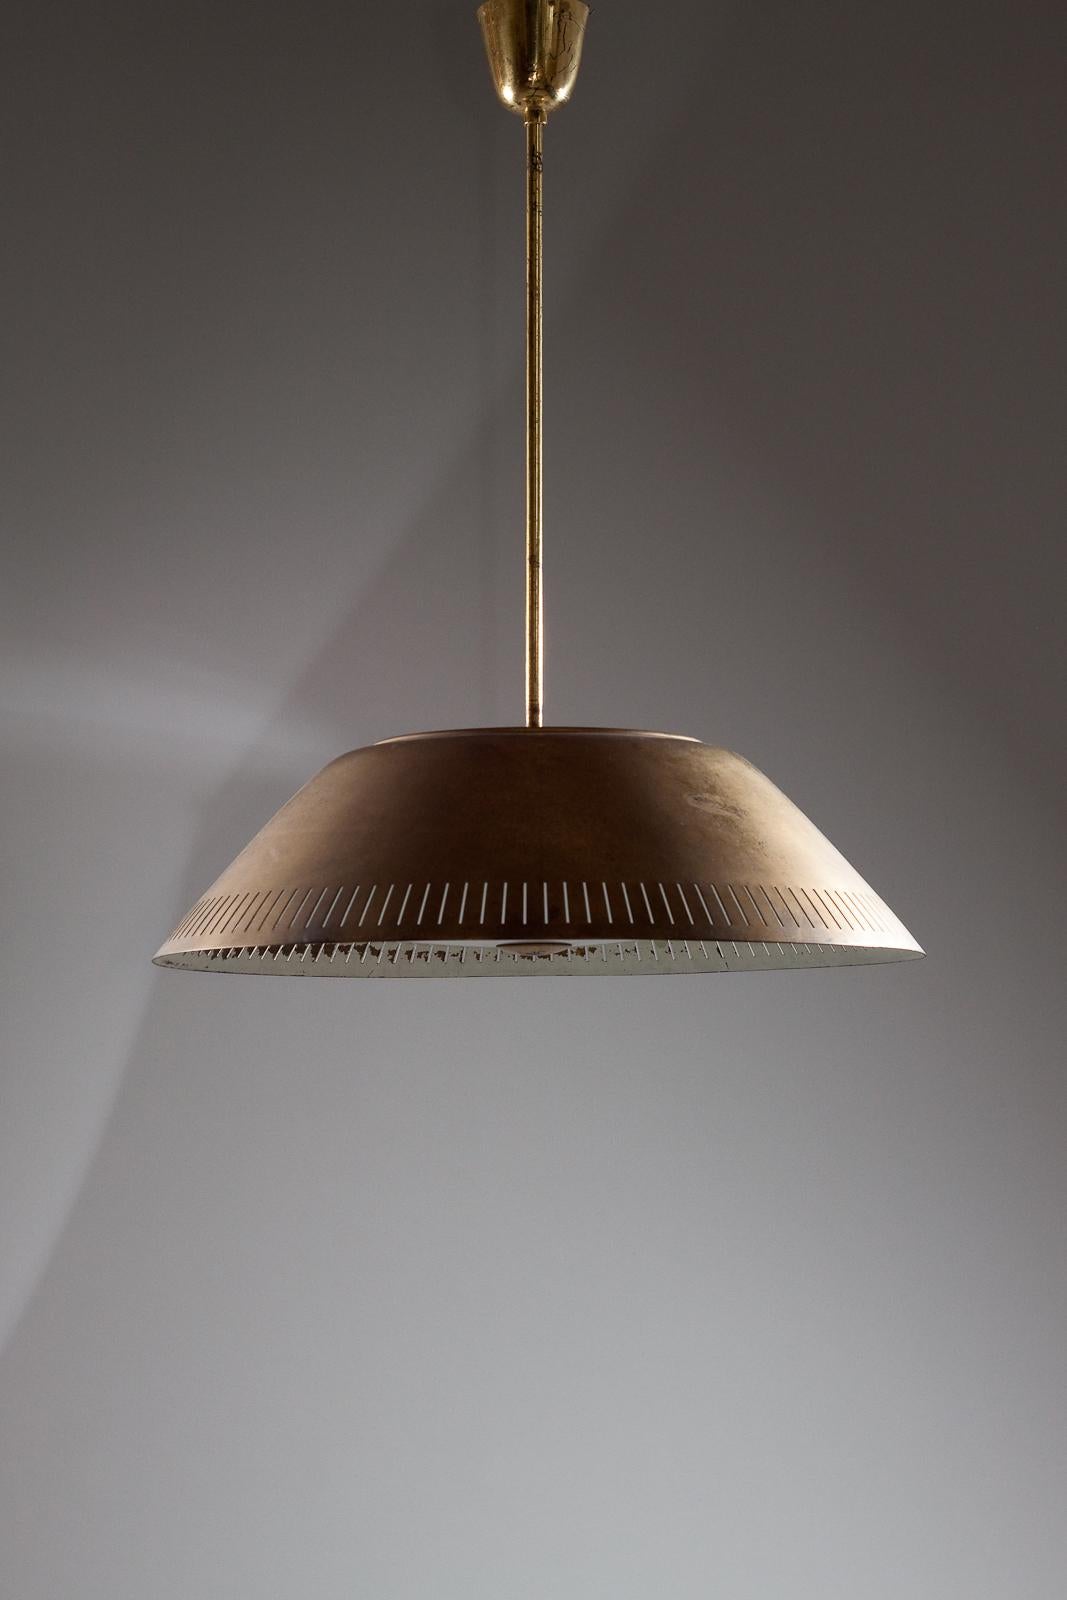 This stunning pendant light from Lisa Johansson-Pape is a rare design, crafted from solid brass. With a large scale of 60 cm in diameter, it will make a bold and striking statement in any room. This pendant is made for ORNO, a renowned Finnish